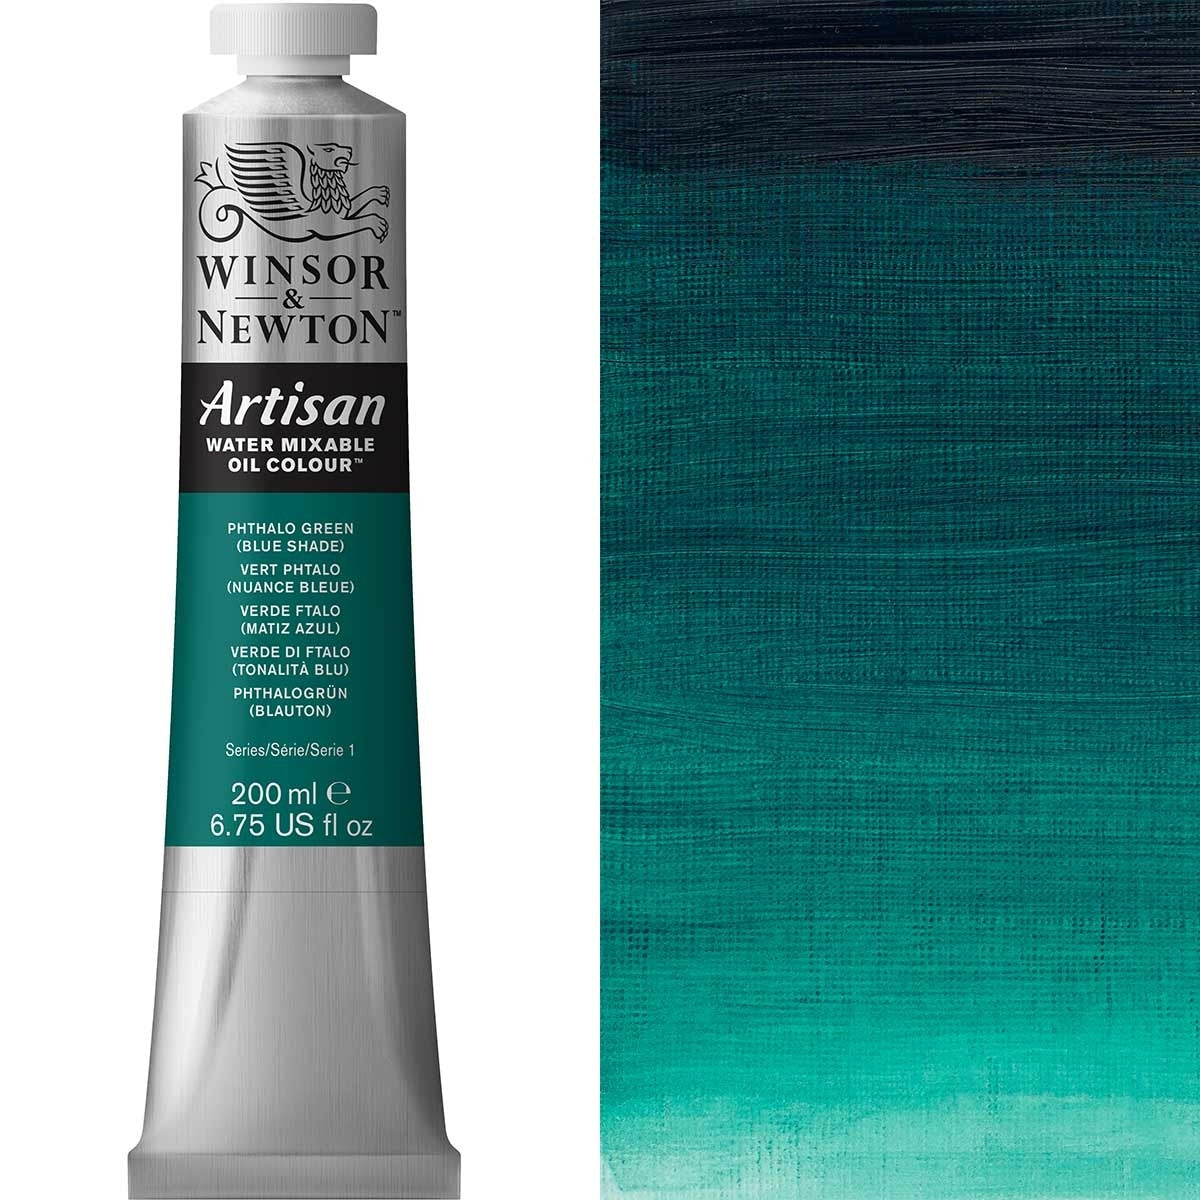 Winsor and Newton - Artisan Oil Colour Watermixable - 200ml - Phthalo Green Blue Shade